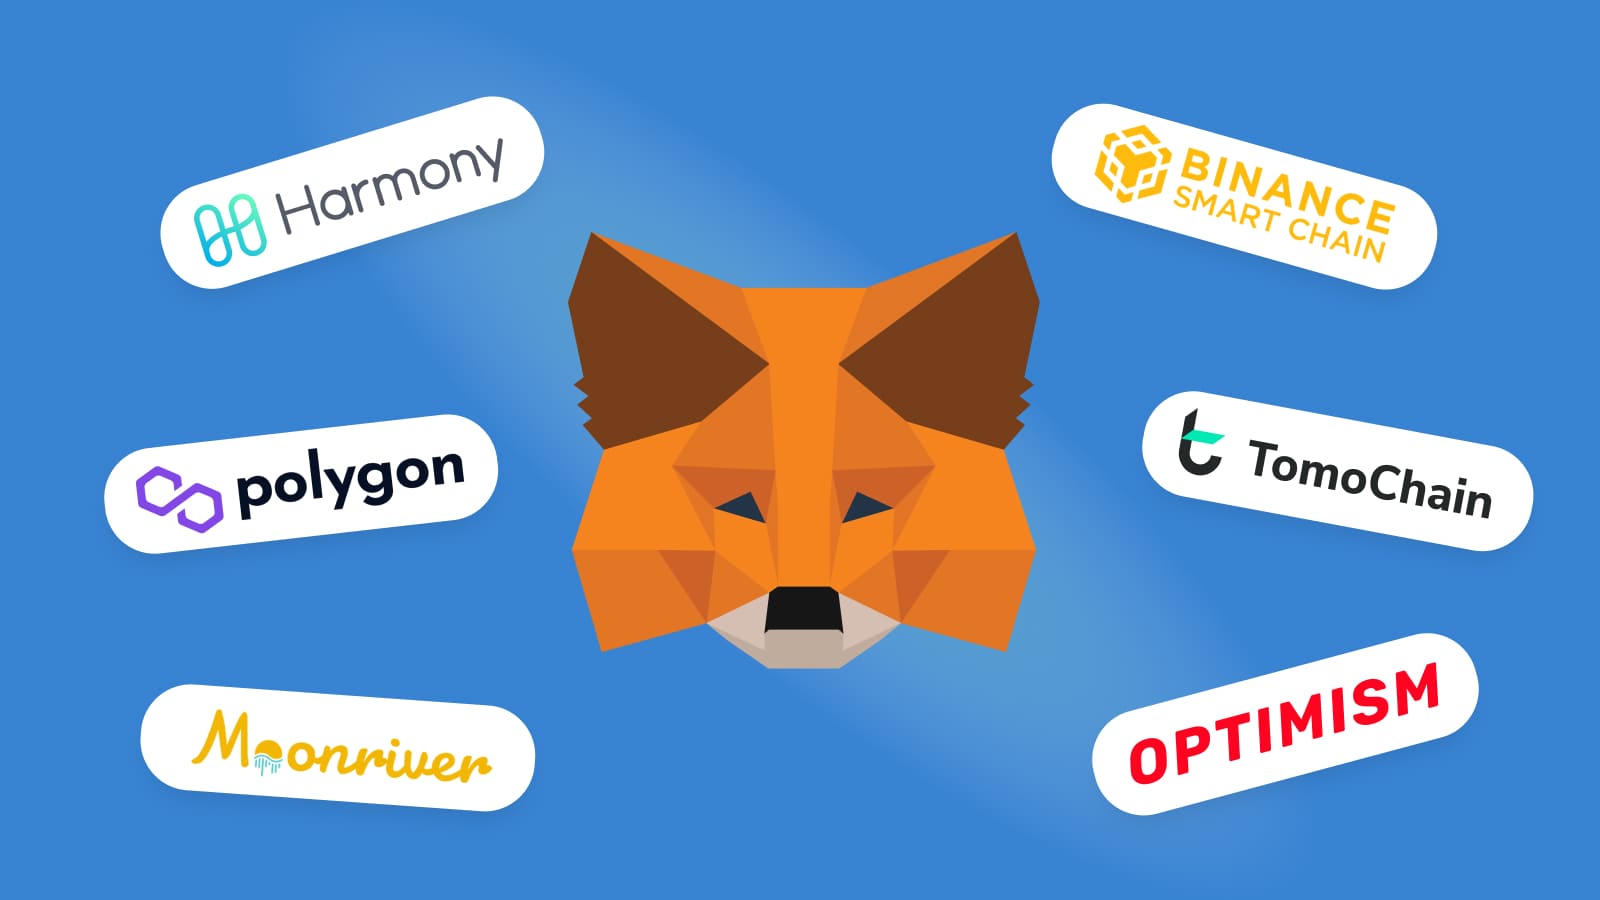 MetaMask provides access to Ethereum and ERC-20 cryptos on diverse networks.